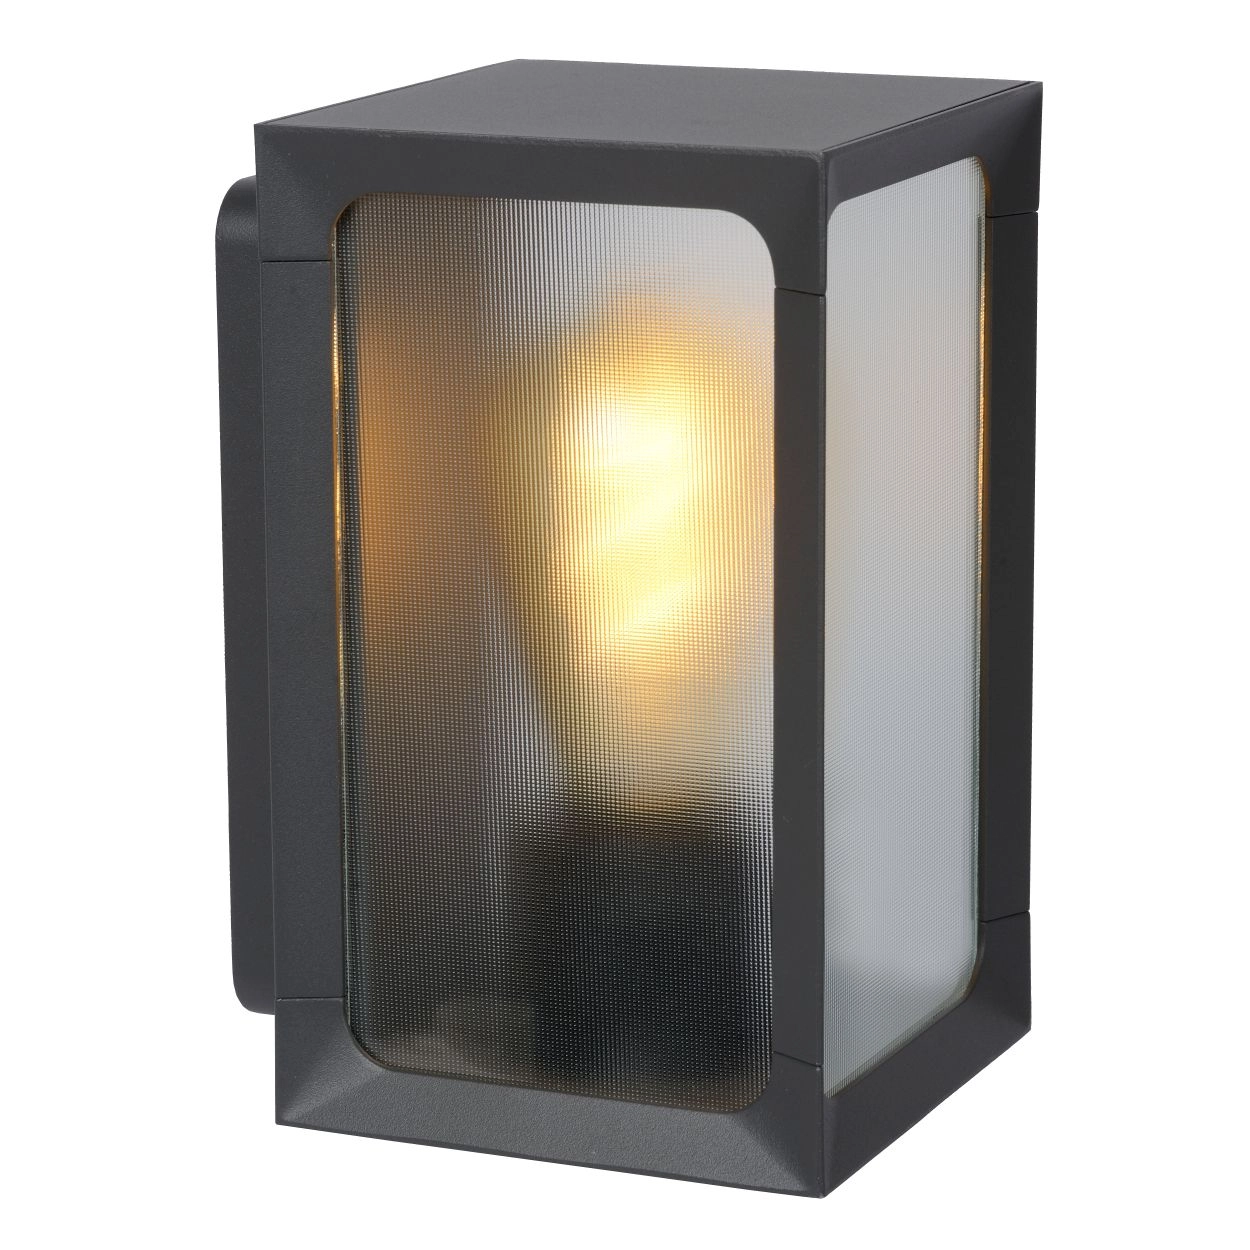 LU 27804/01/29 Lucide CAGE - Wall light Outdoor - LED - 1xE27 - IP44 - Anthracite